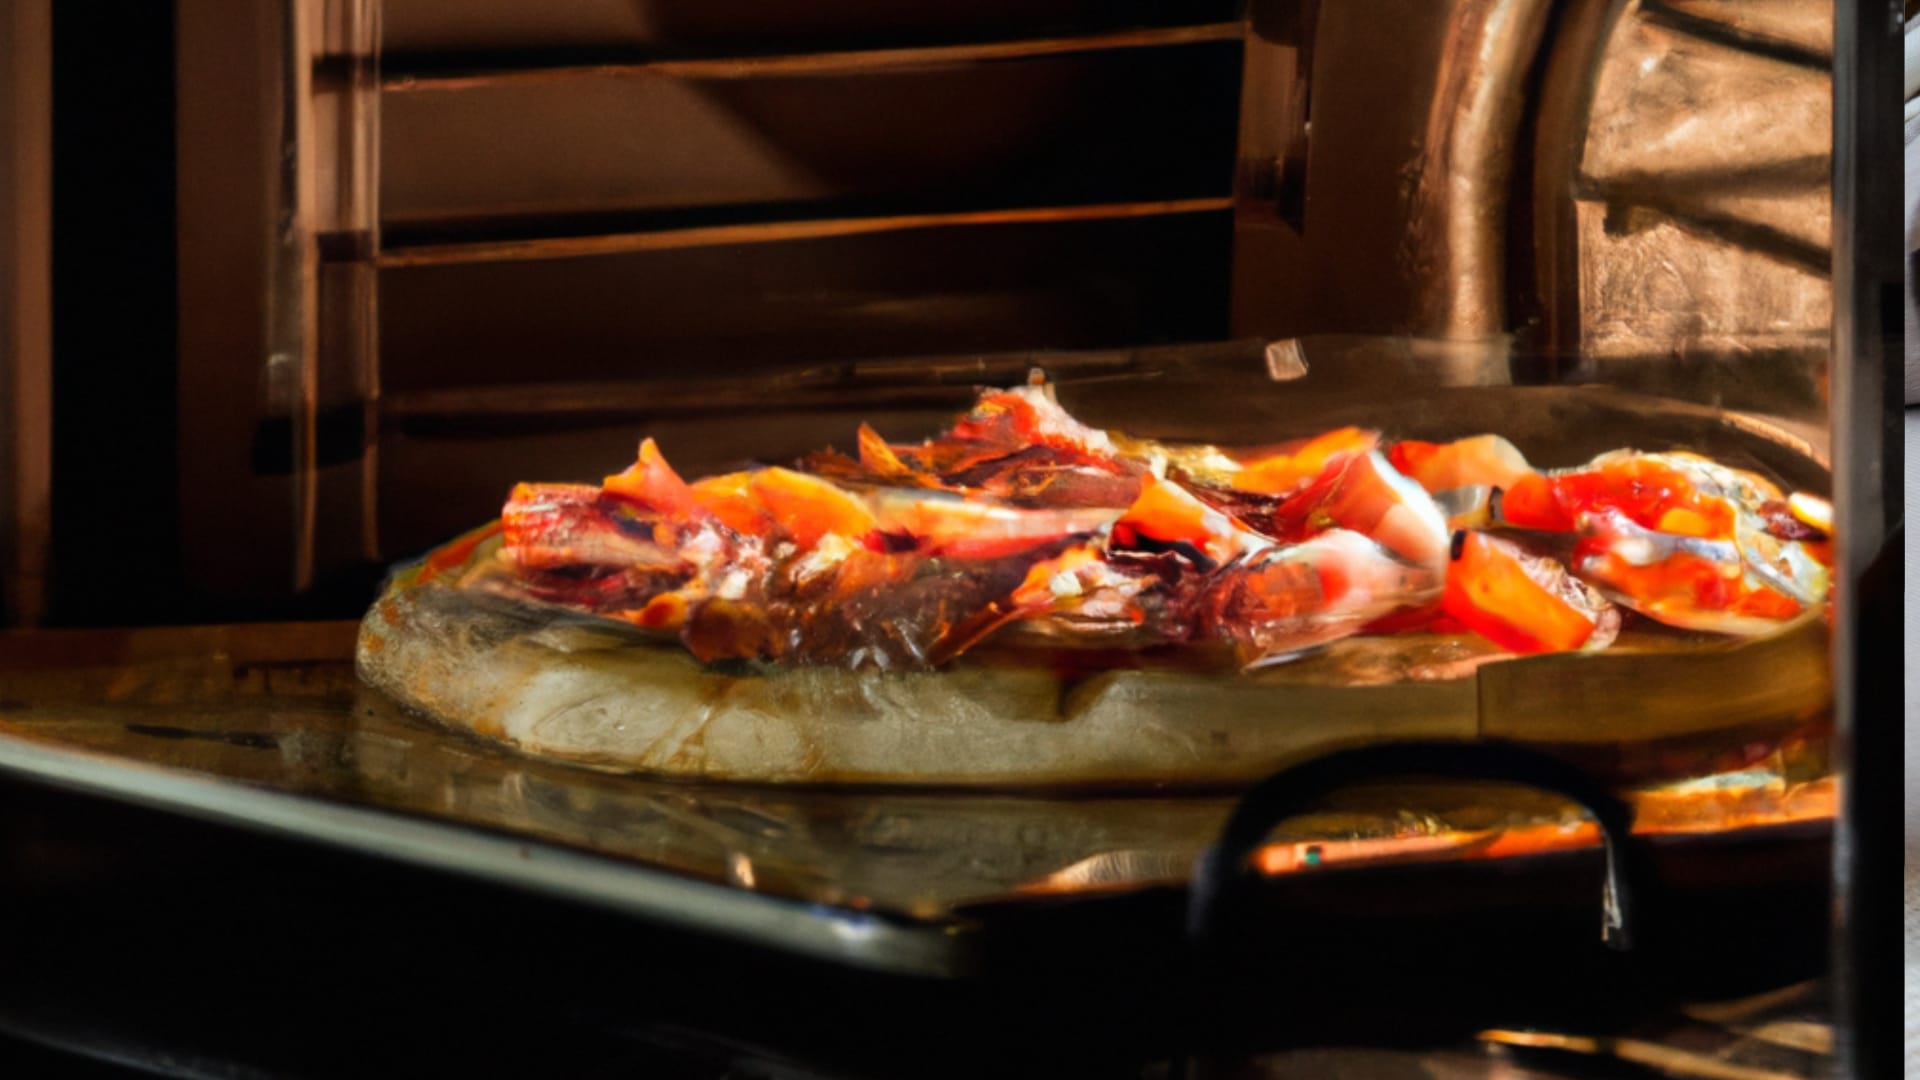 Why Your Gas Oven Is Not Heating Up: 5 Potential Causes